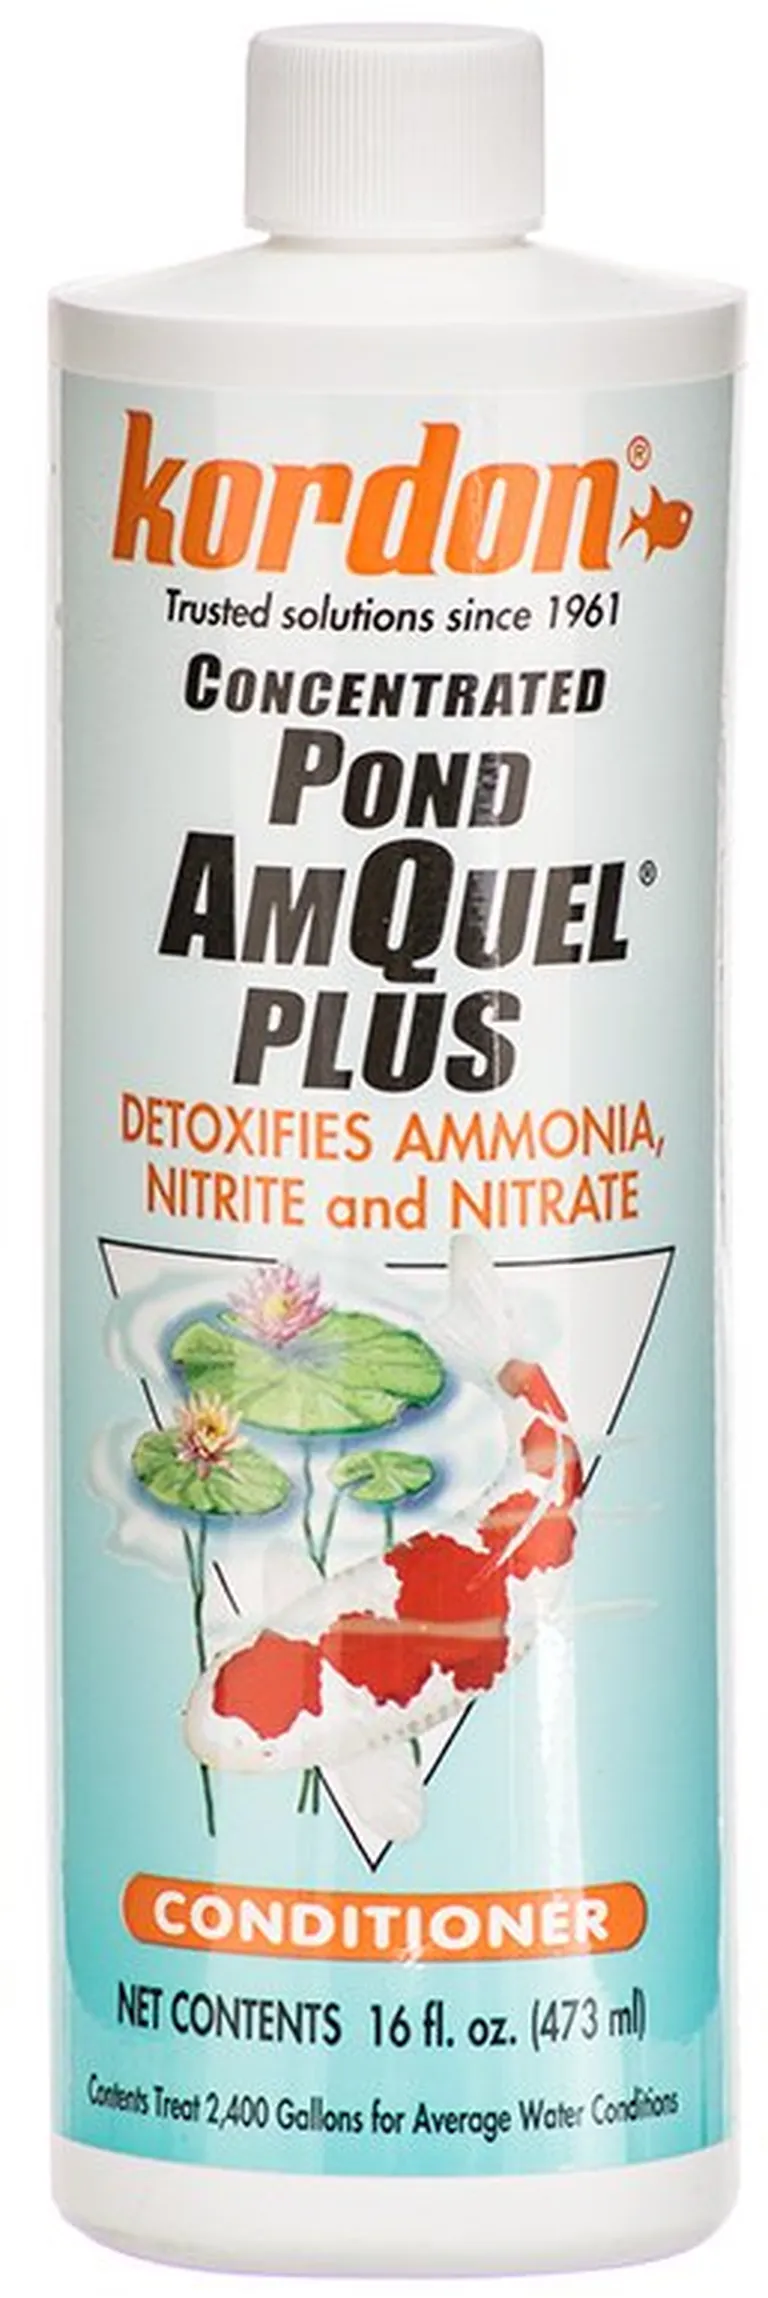 Kordon Pond AmQuel Plus Detoxifies Ammonia Nitrite and Nitrate Concentrated Water Conditioner Photo 1